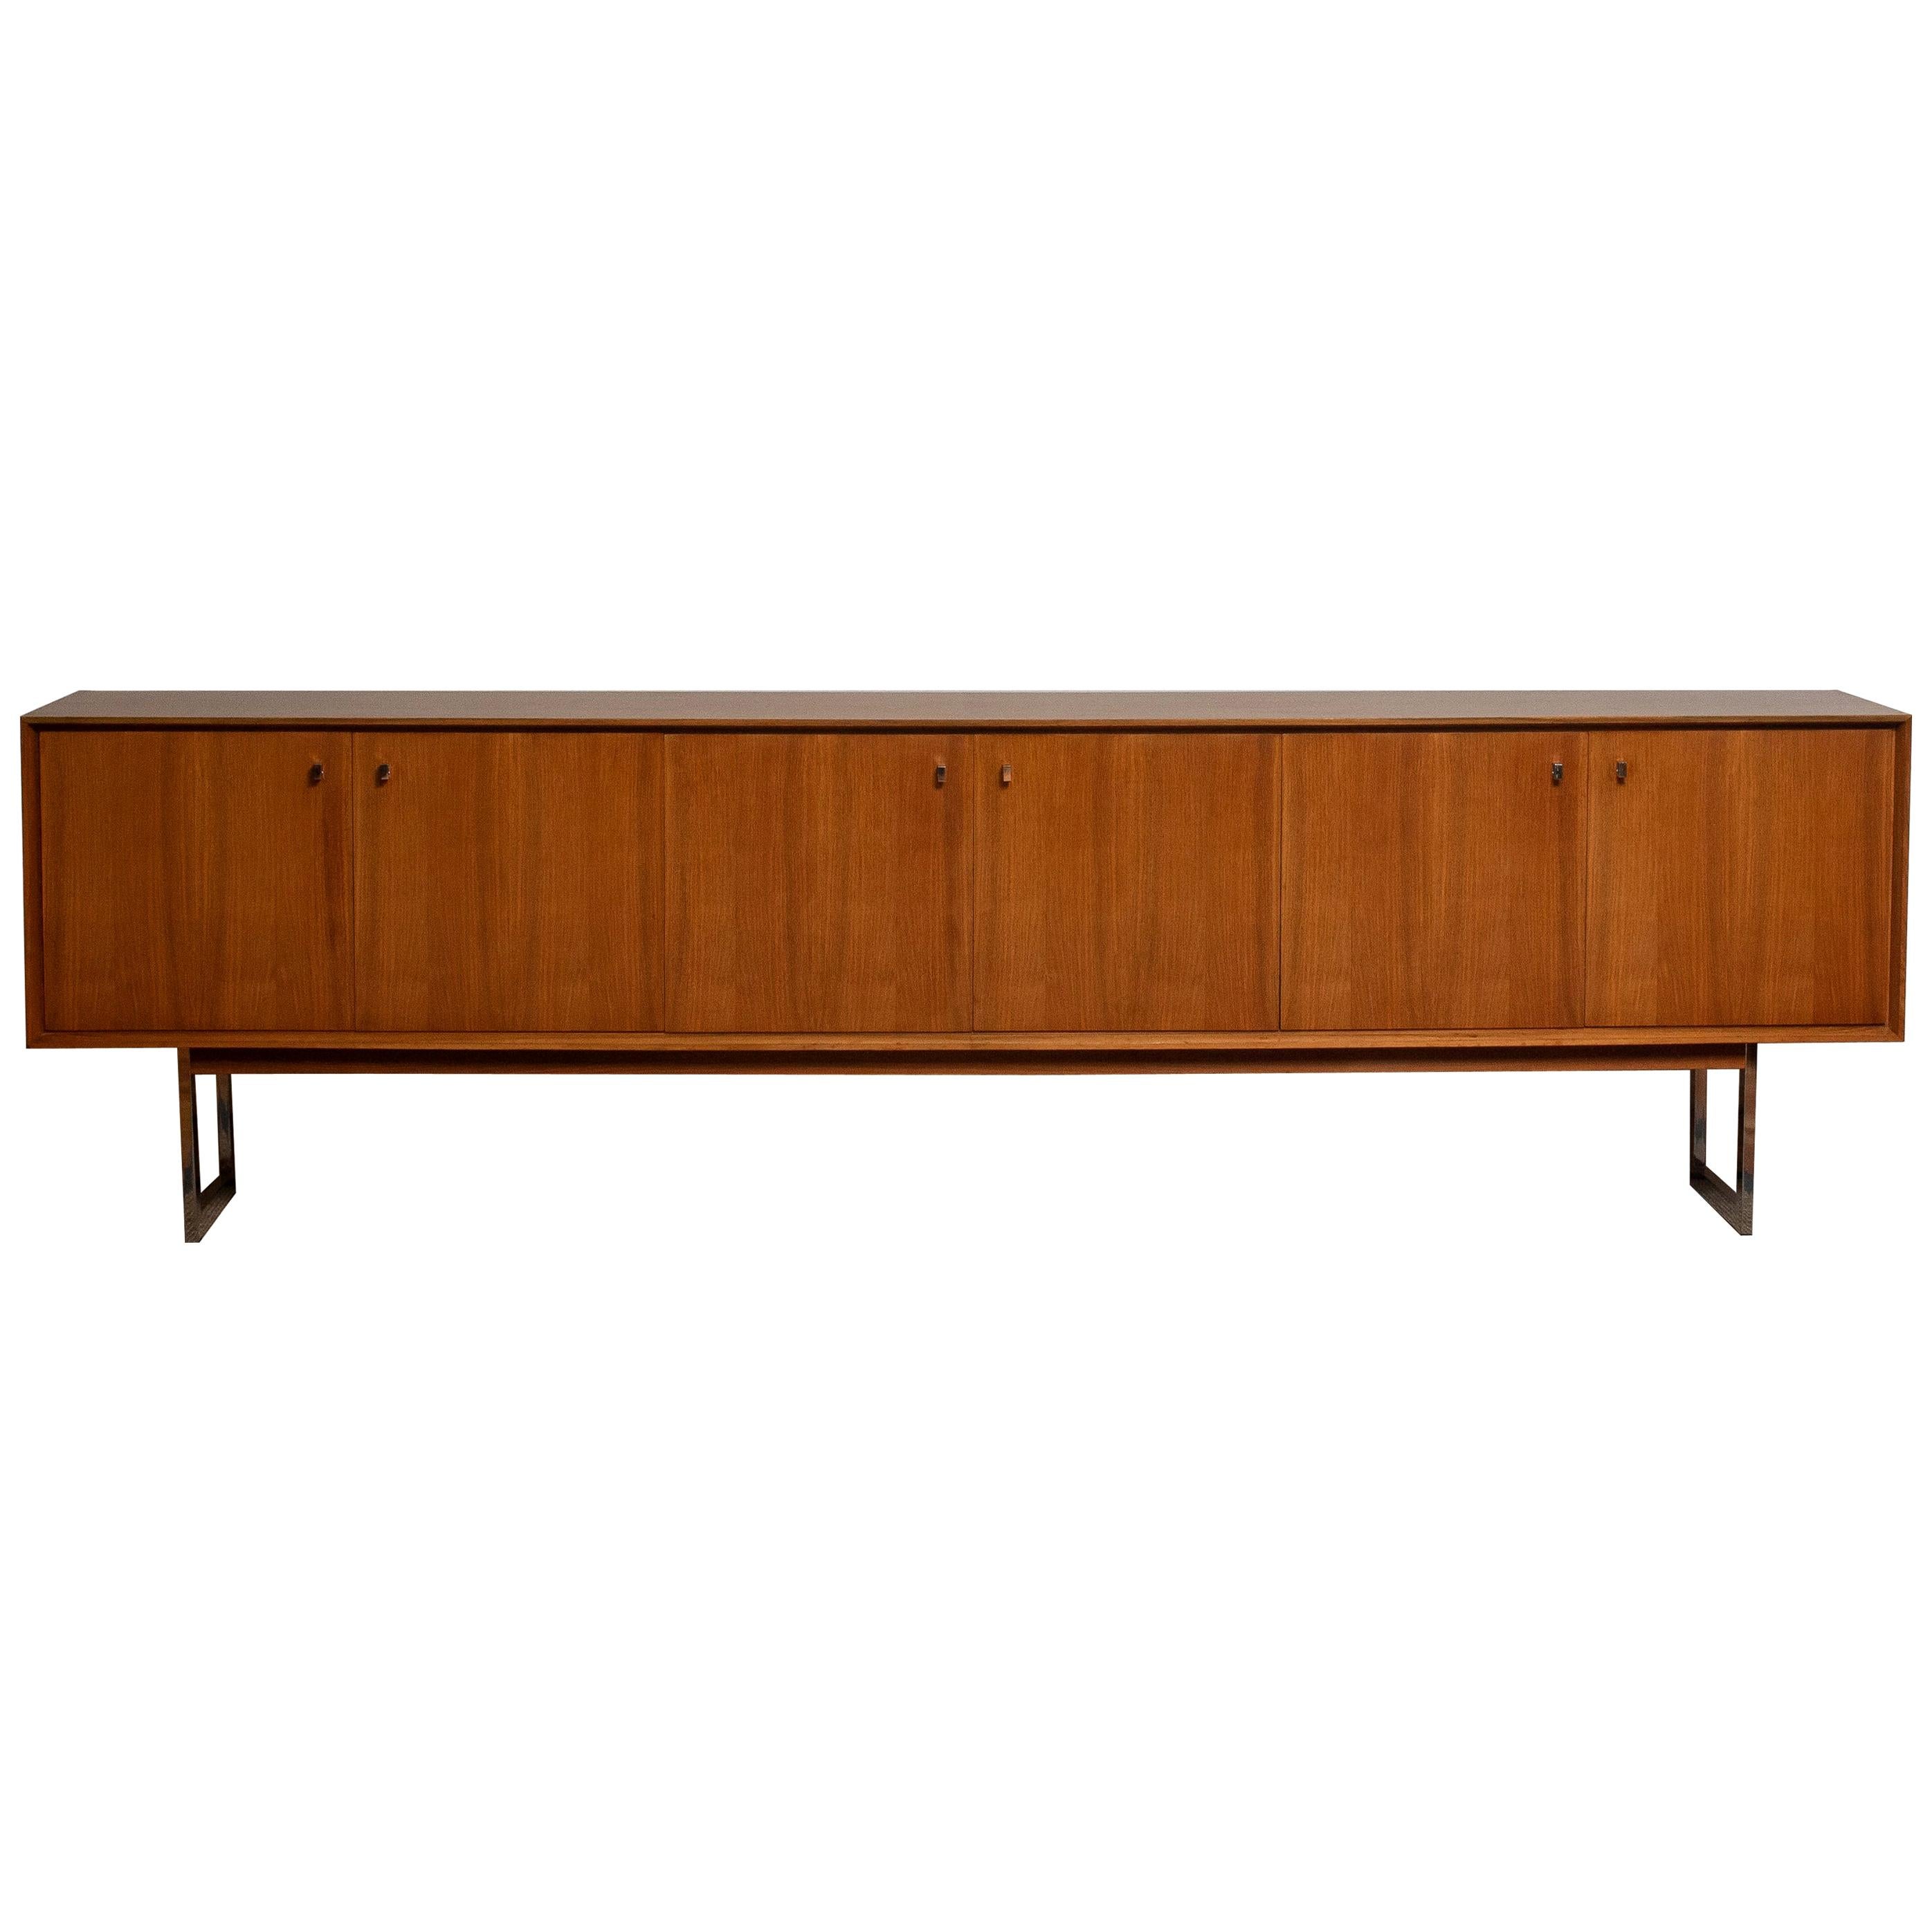 Extreme beautiful and extra wide credenzas / sideboard, 118 inches, in walnut on chrome legs.
It's a great quality piece and the overall condition is very good!
  